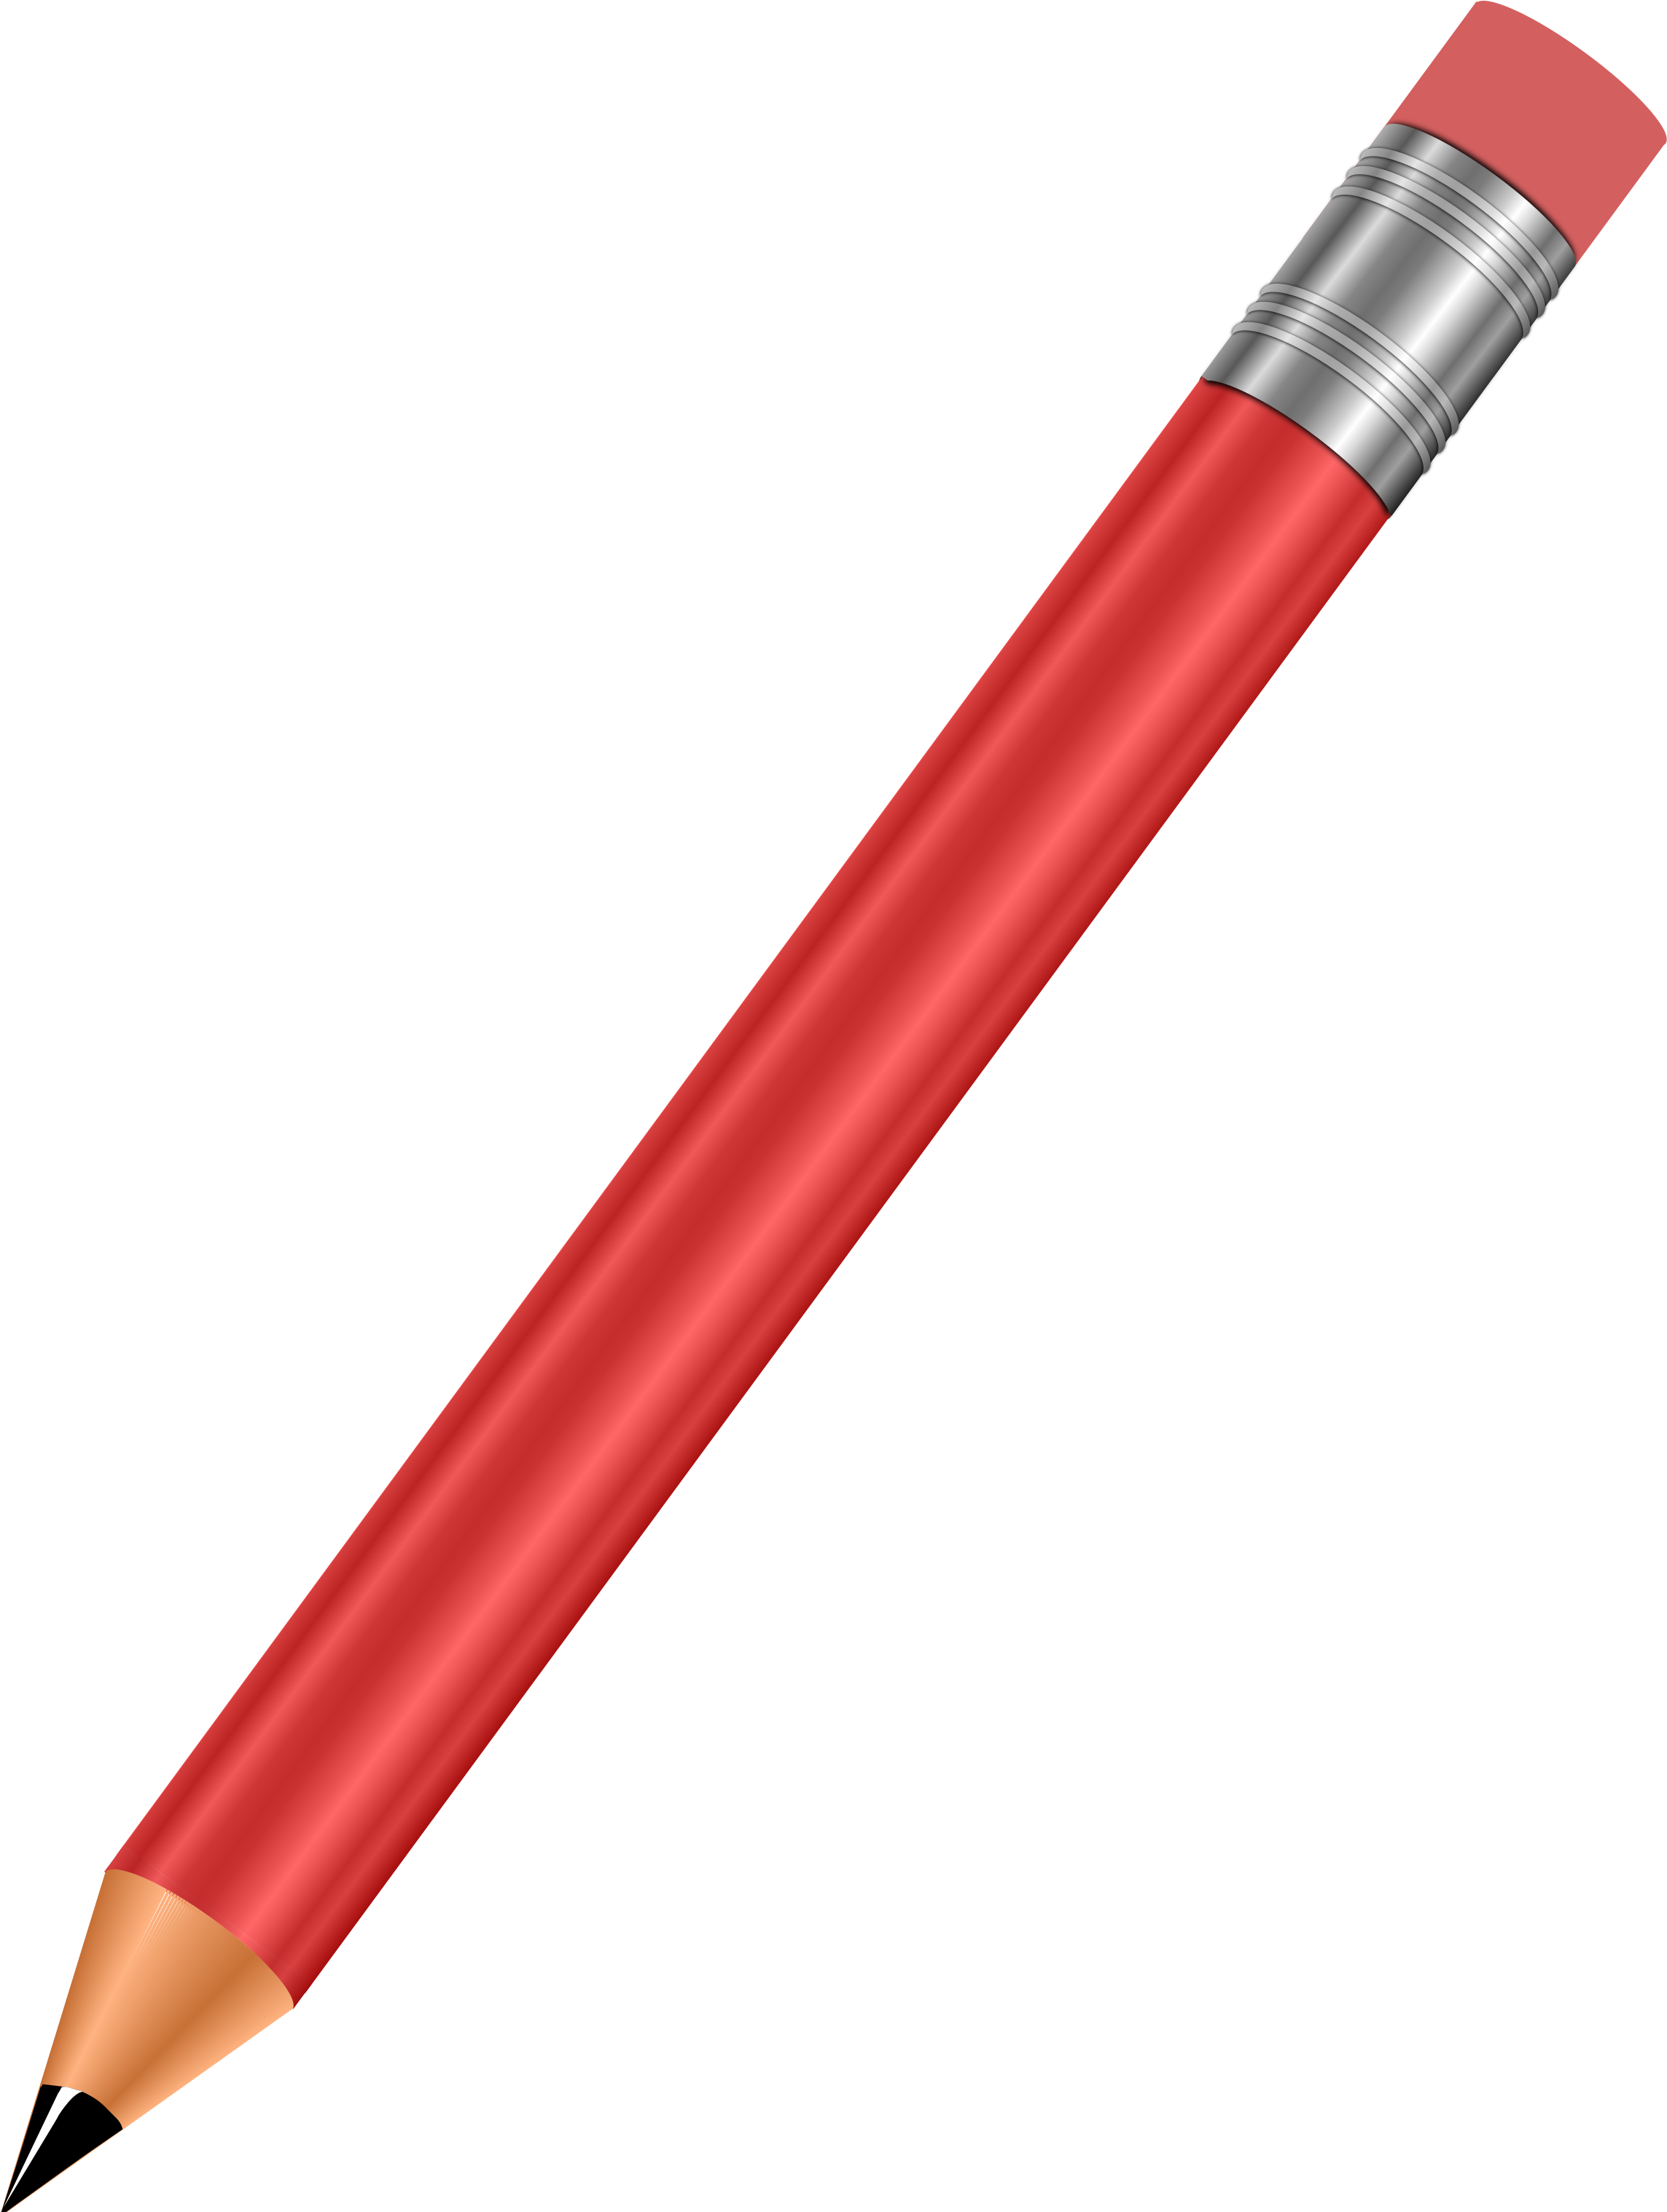 Red Pencil Clipart Amp Red Pencil Clip Art Images - Caran D Ache Frosty (2400x3040)